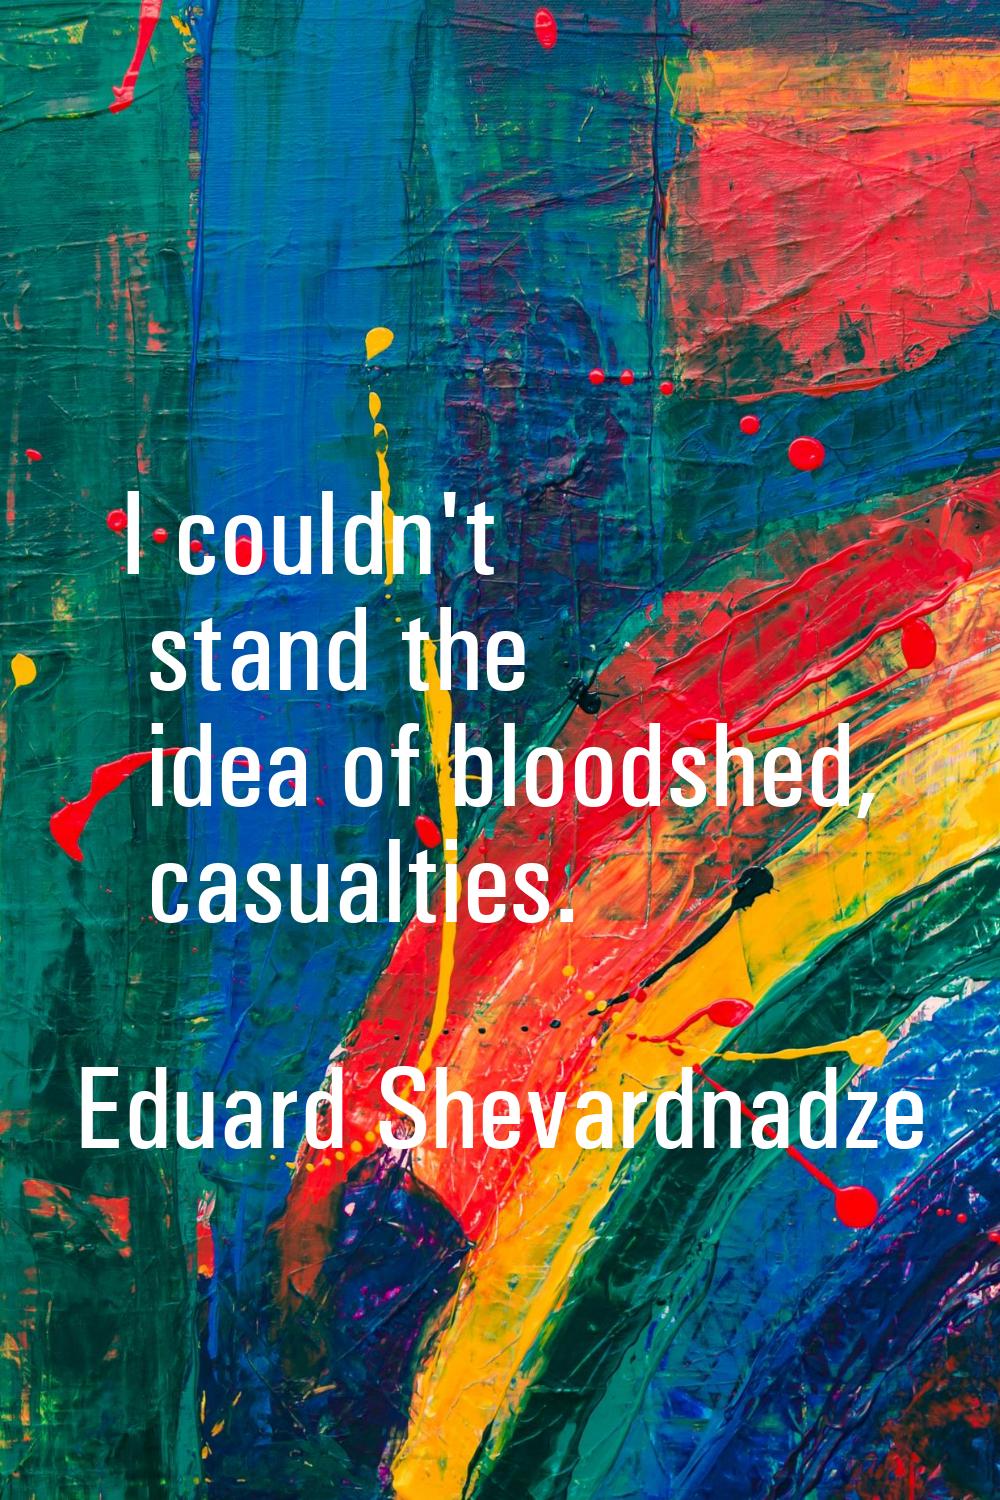 I couldn't stand the idea of bloodshed, casualties.